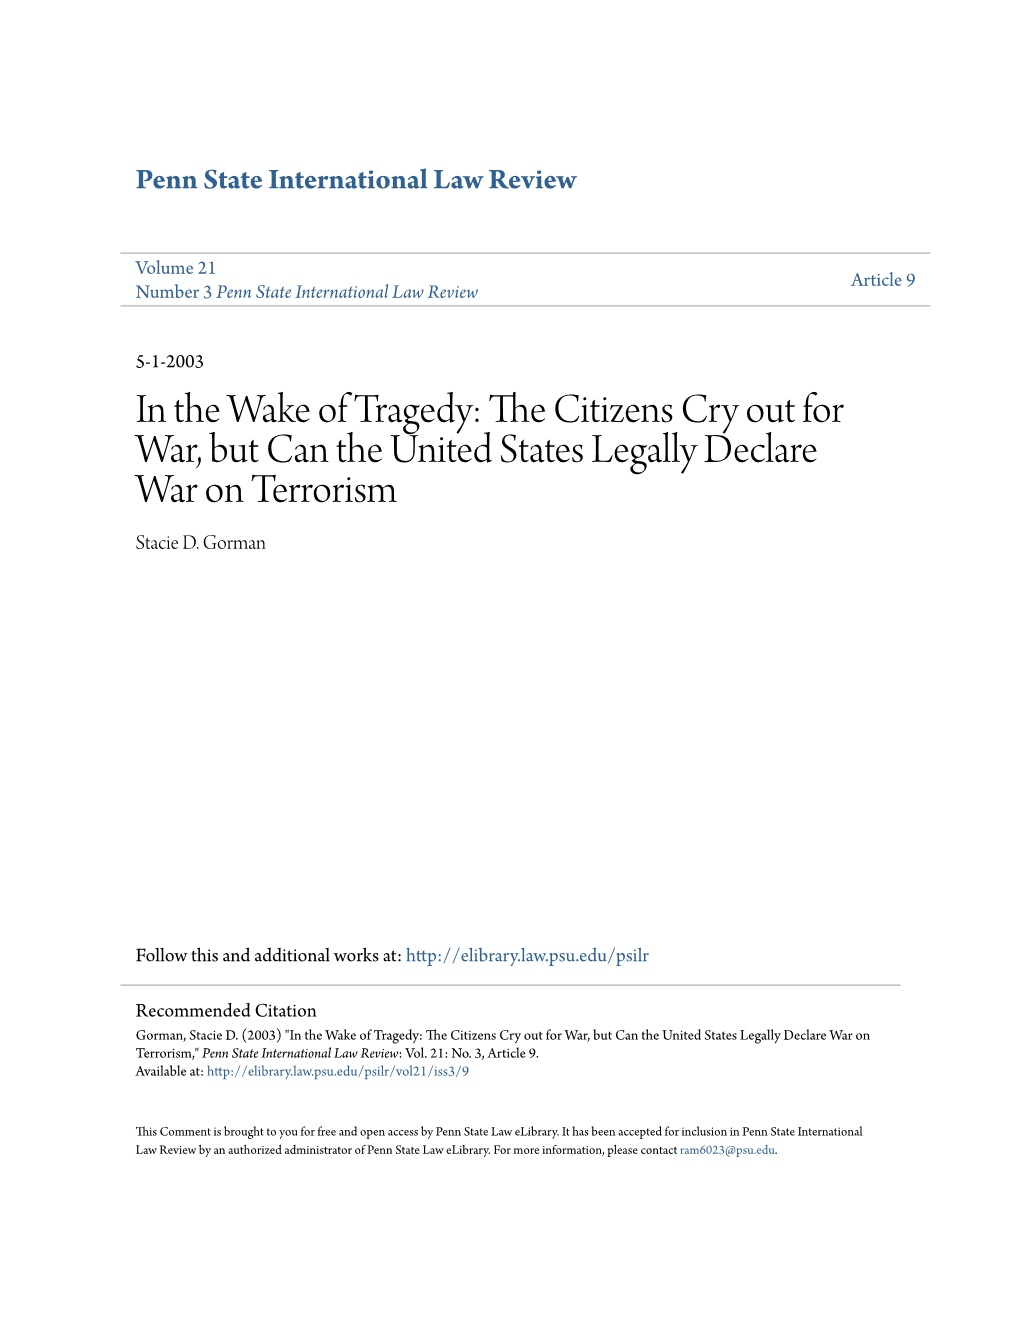 In the Wake of Tragedy: the Citizens Cry out for War, but Can the United States Legally Declare War on Terrorism?